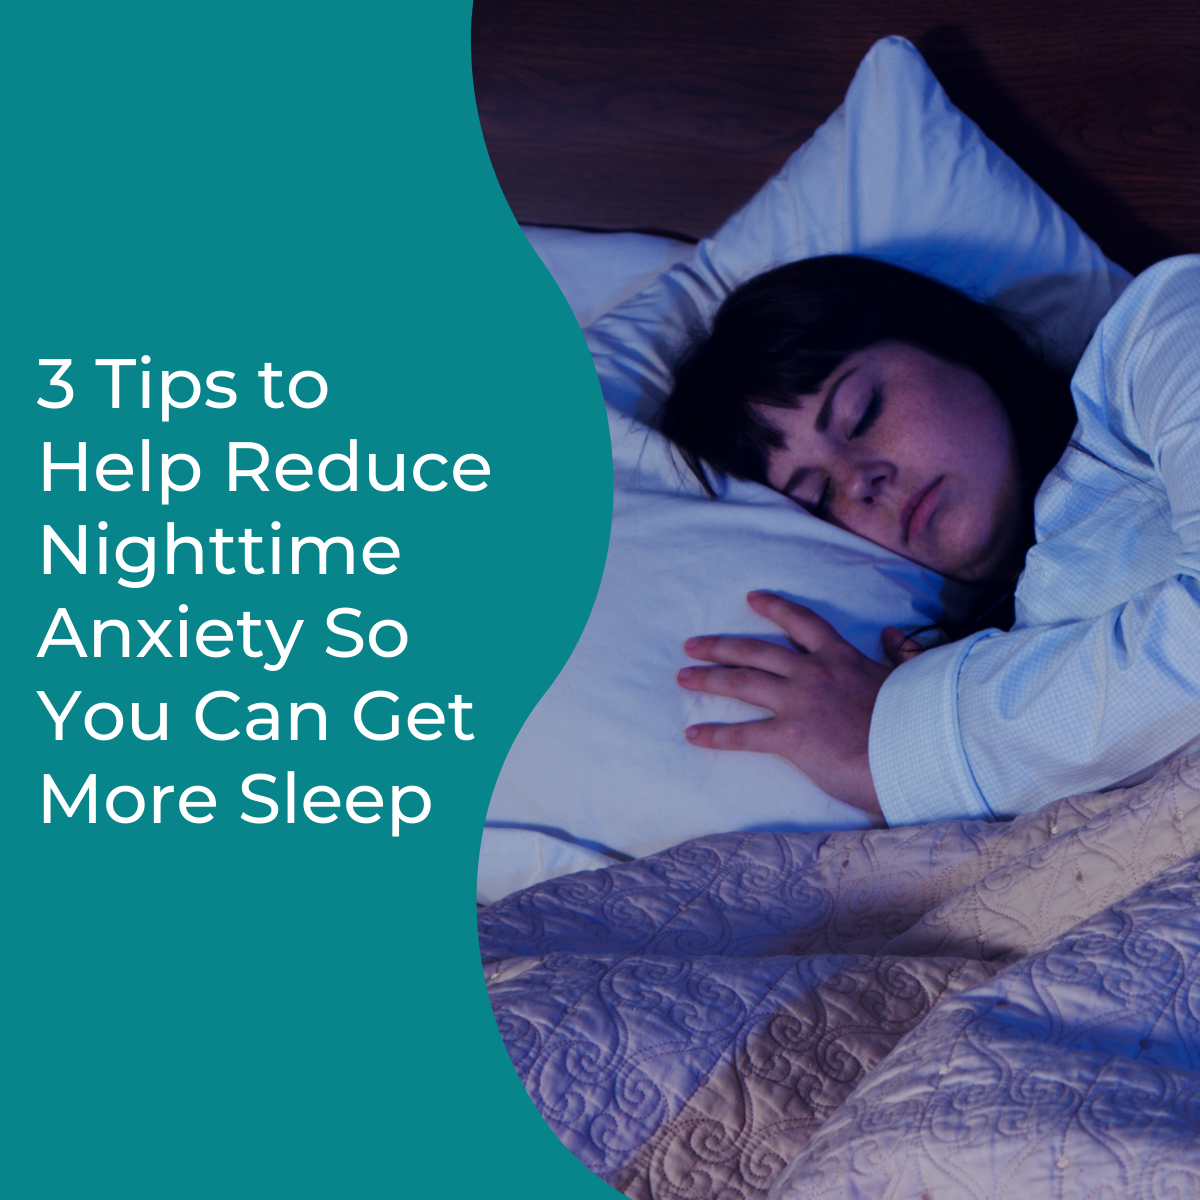 You are currently viewing 3 Tips to Help Reduce Nighttime Anxiety So You Can Get More Sleep